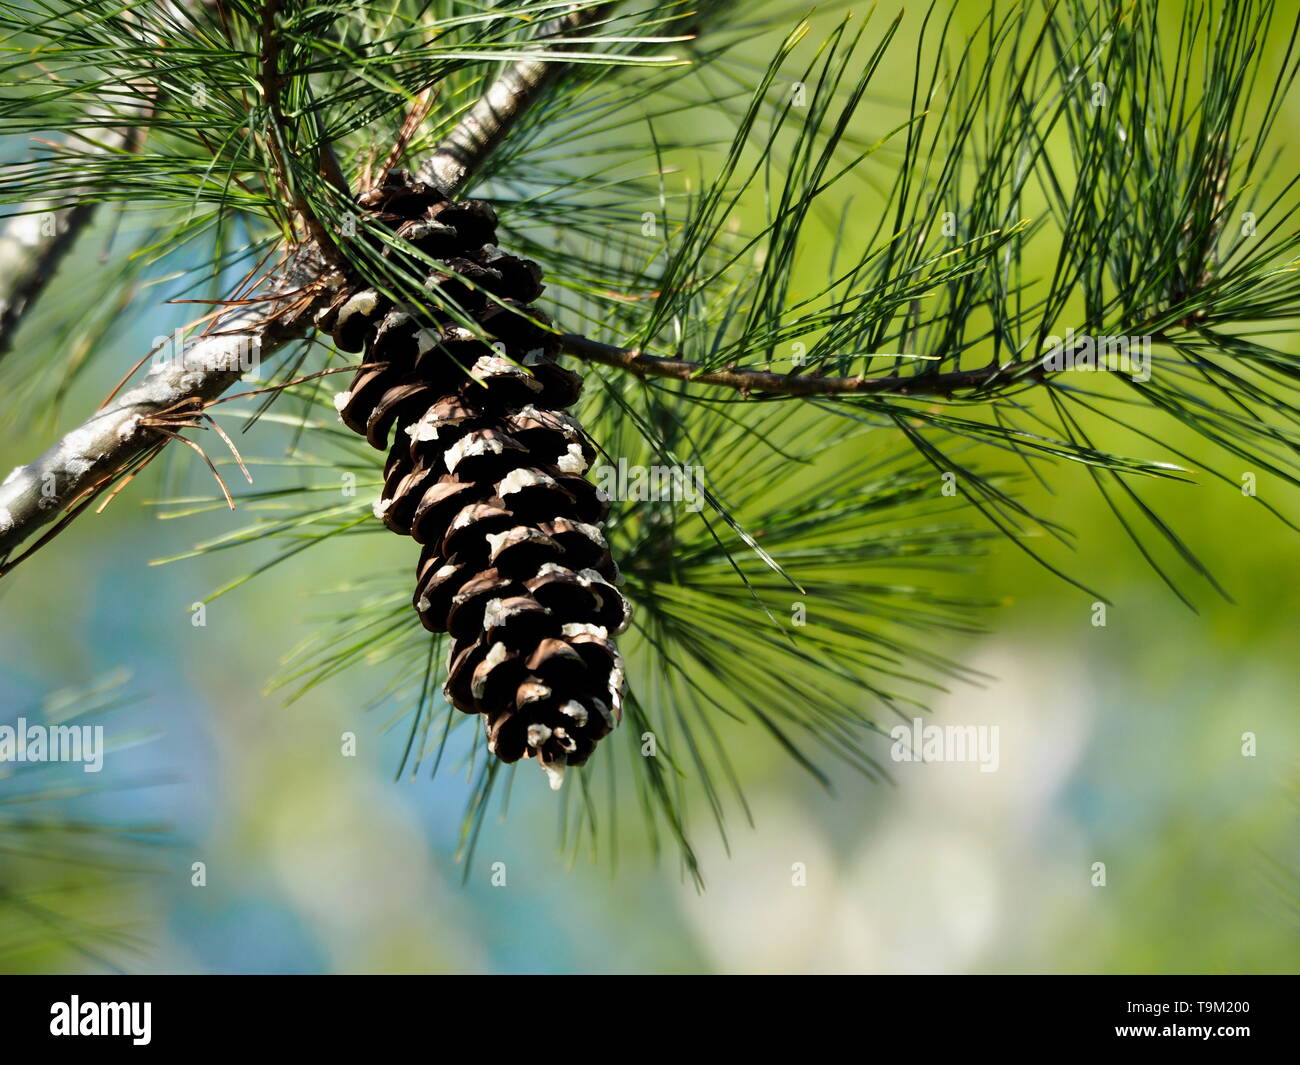 Lone pinecone hanging from branch with bright blue and green background Stock Photo